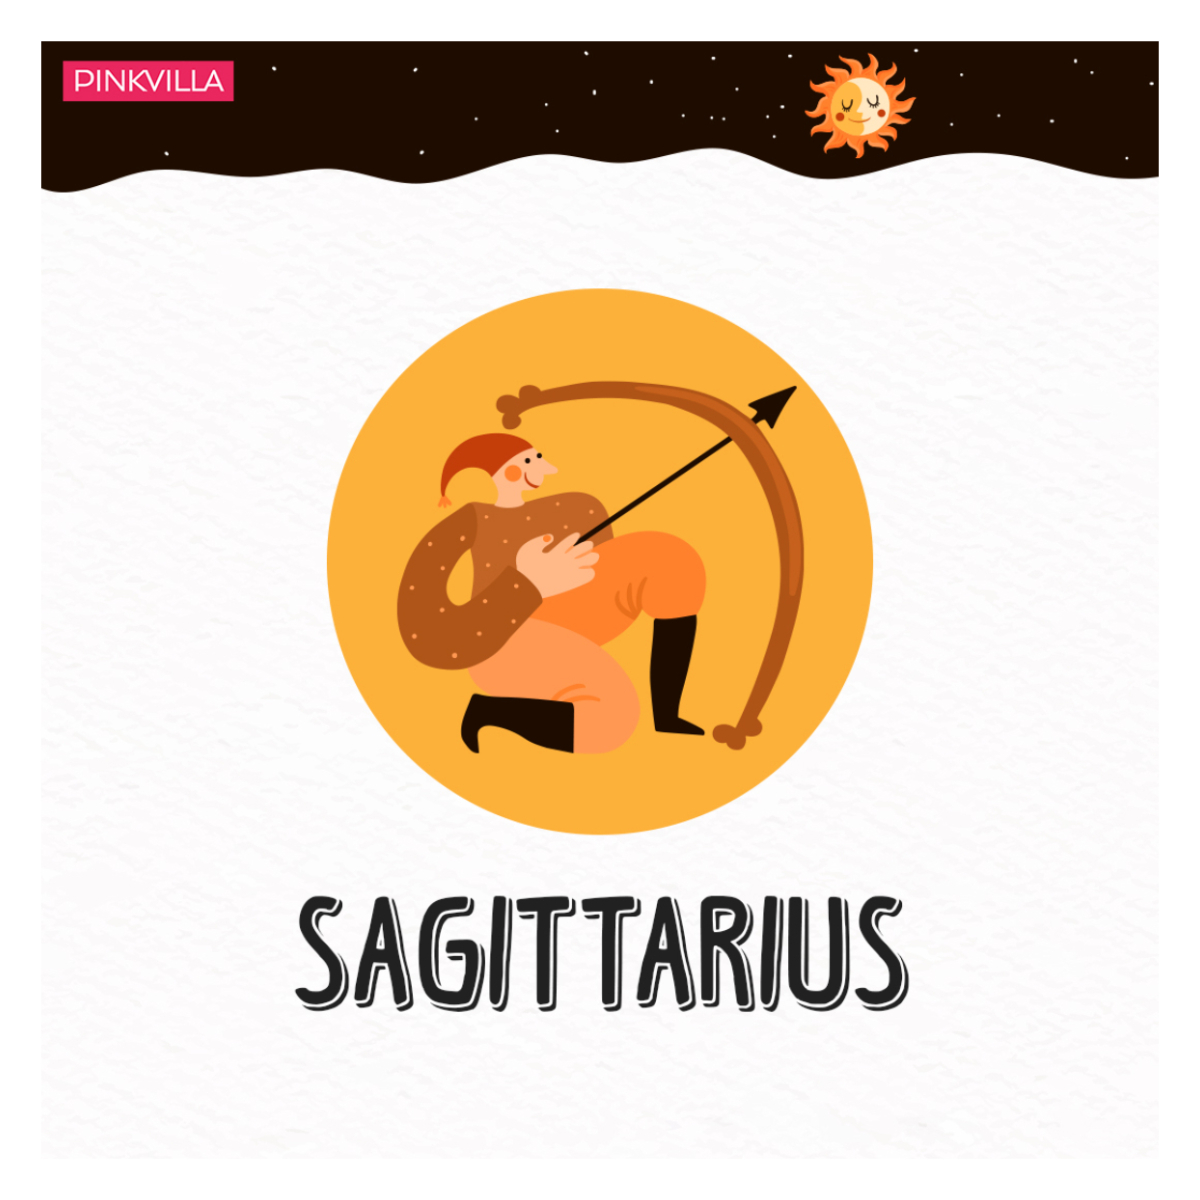 Zodiac signs who have the worst attitude